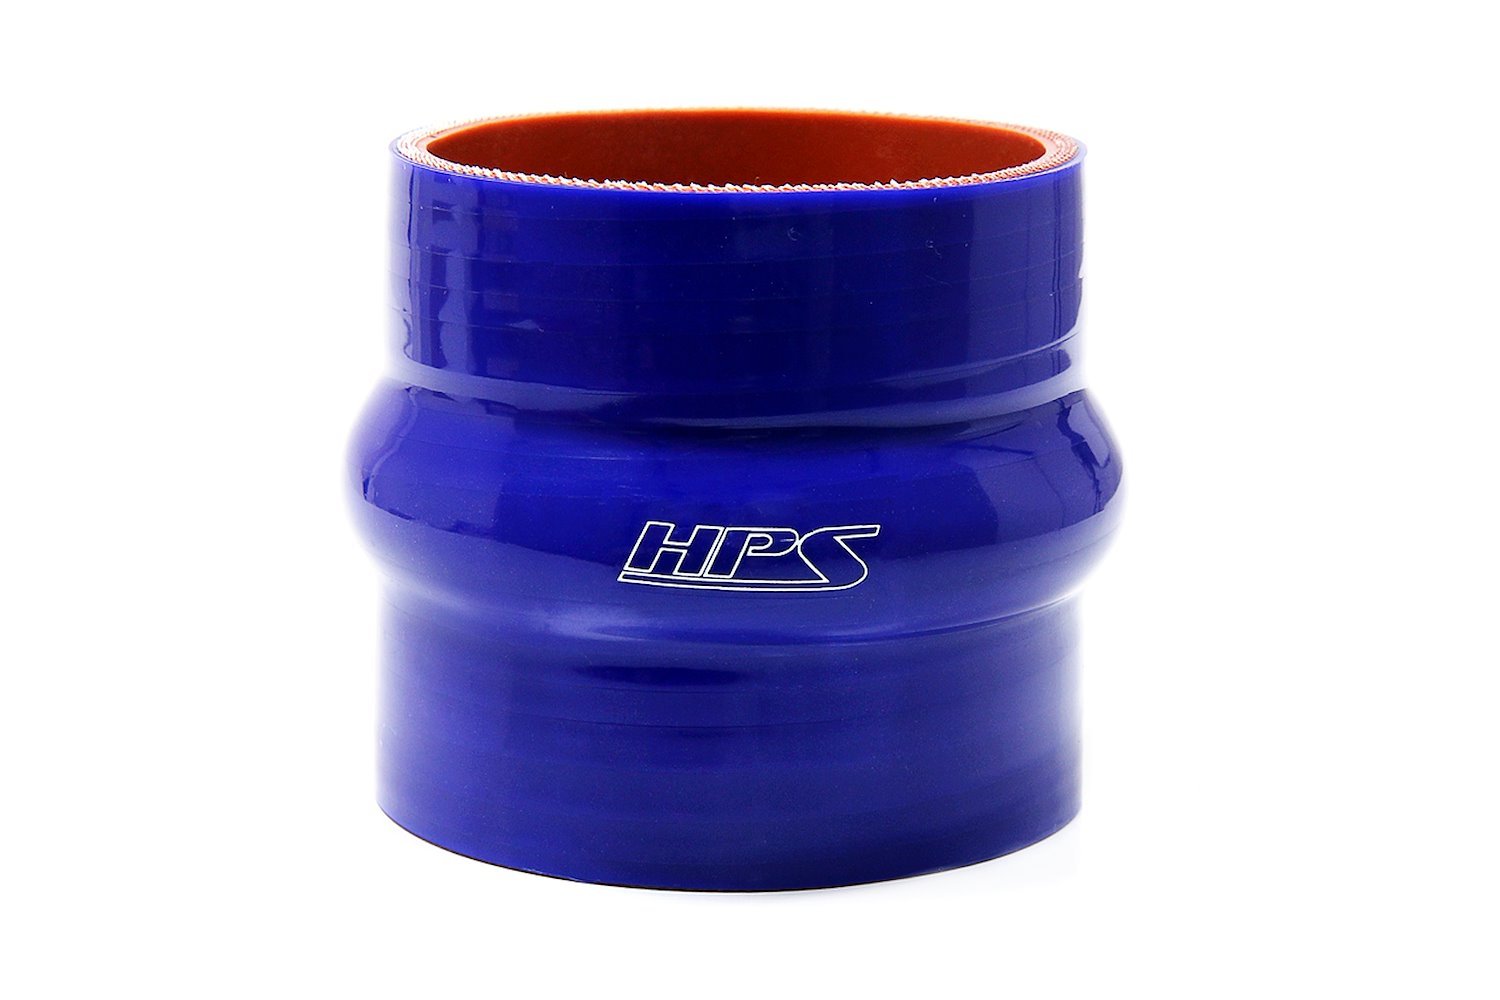 HTSHC-325-L6-BLUE Silicone Hump Coupler Hose, High-Temp 4-Ply Reinforced, 3-1/4 in. ID, 6 in. Long, Blue